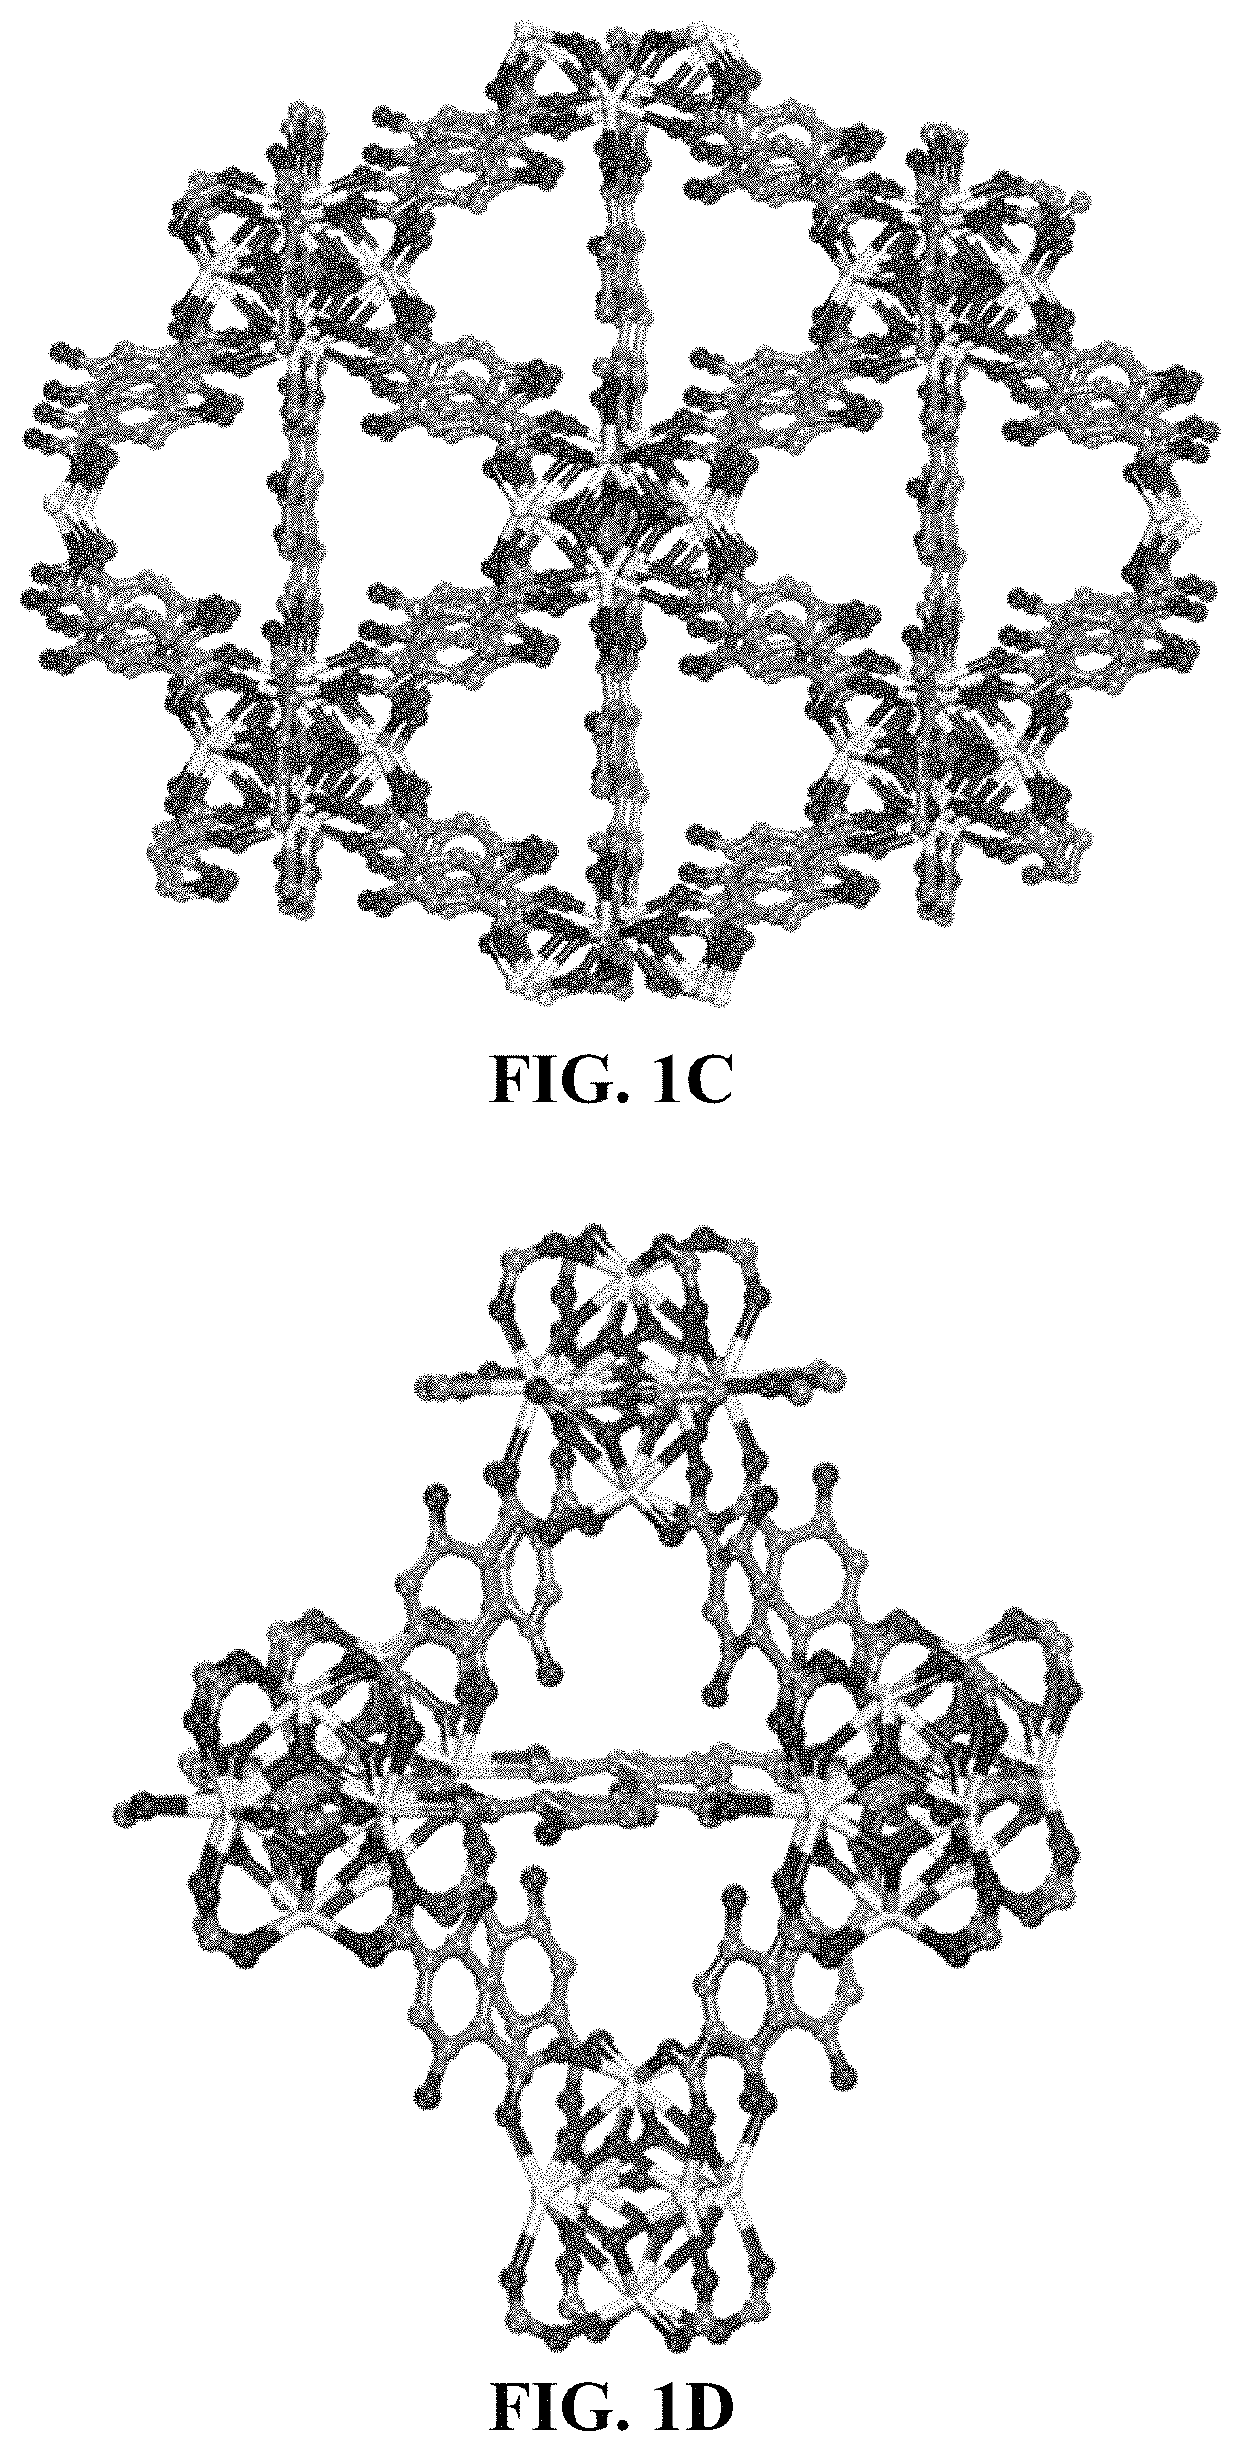 Tunable metal-organic framework compositions and methods thereof